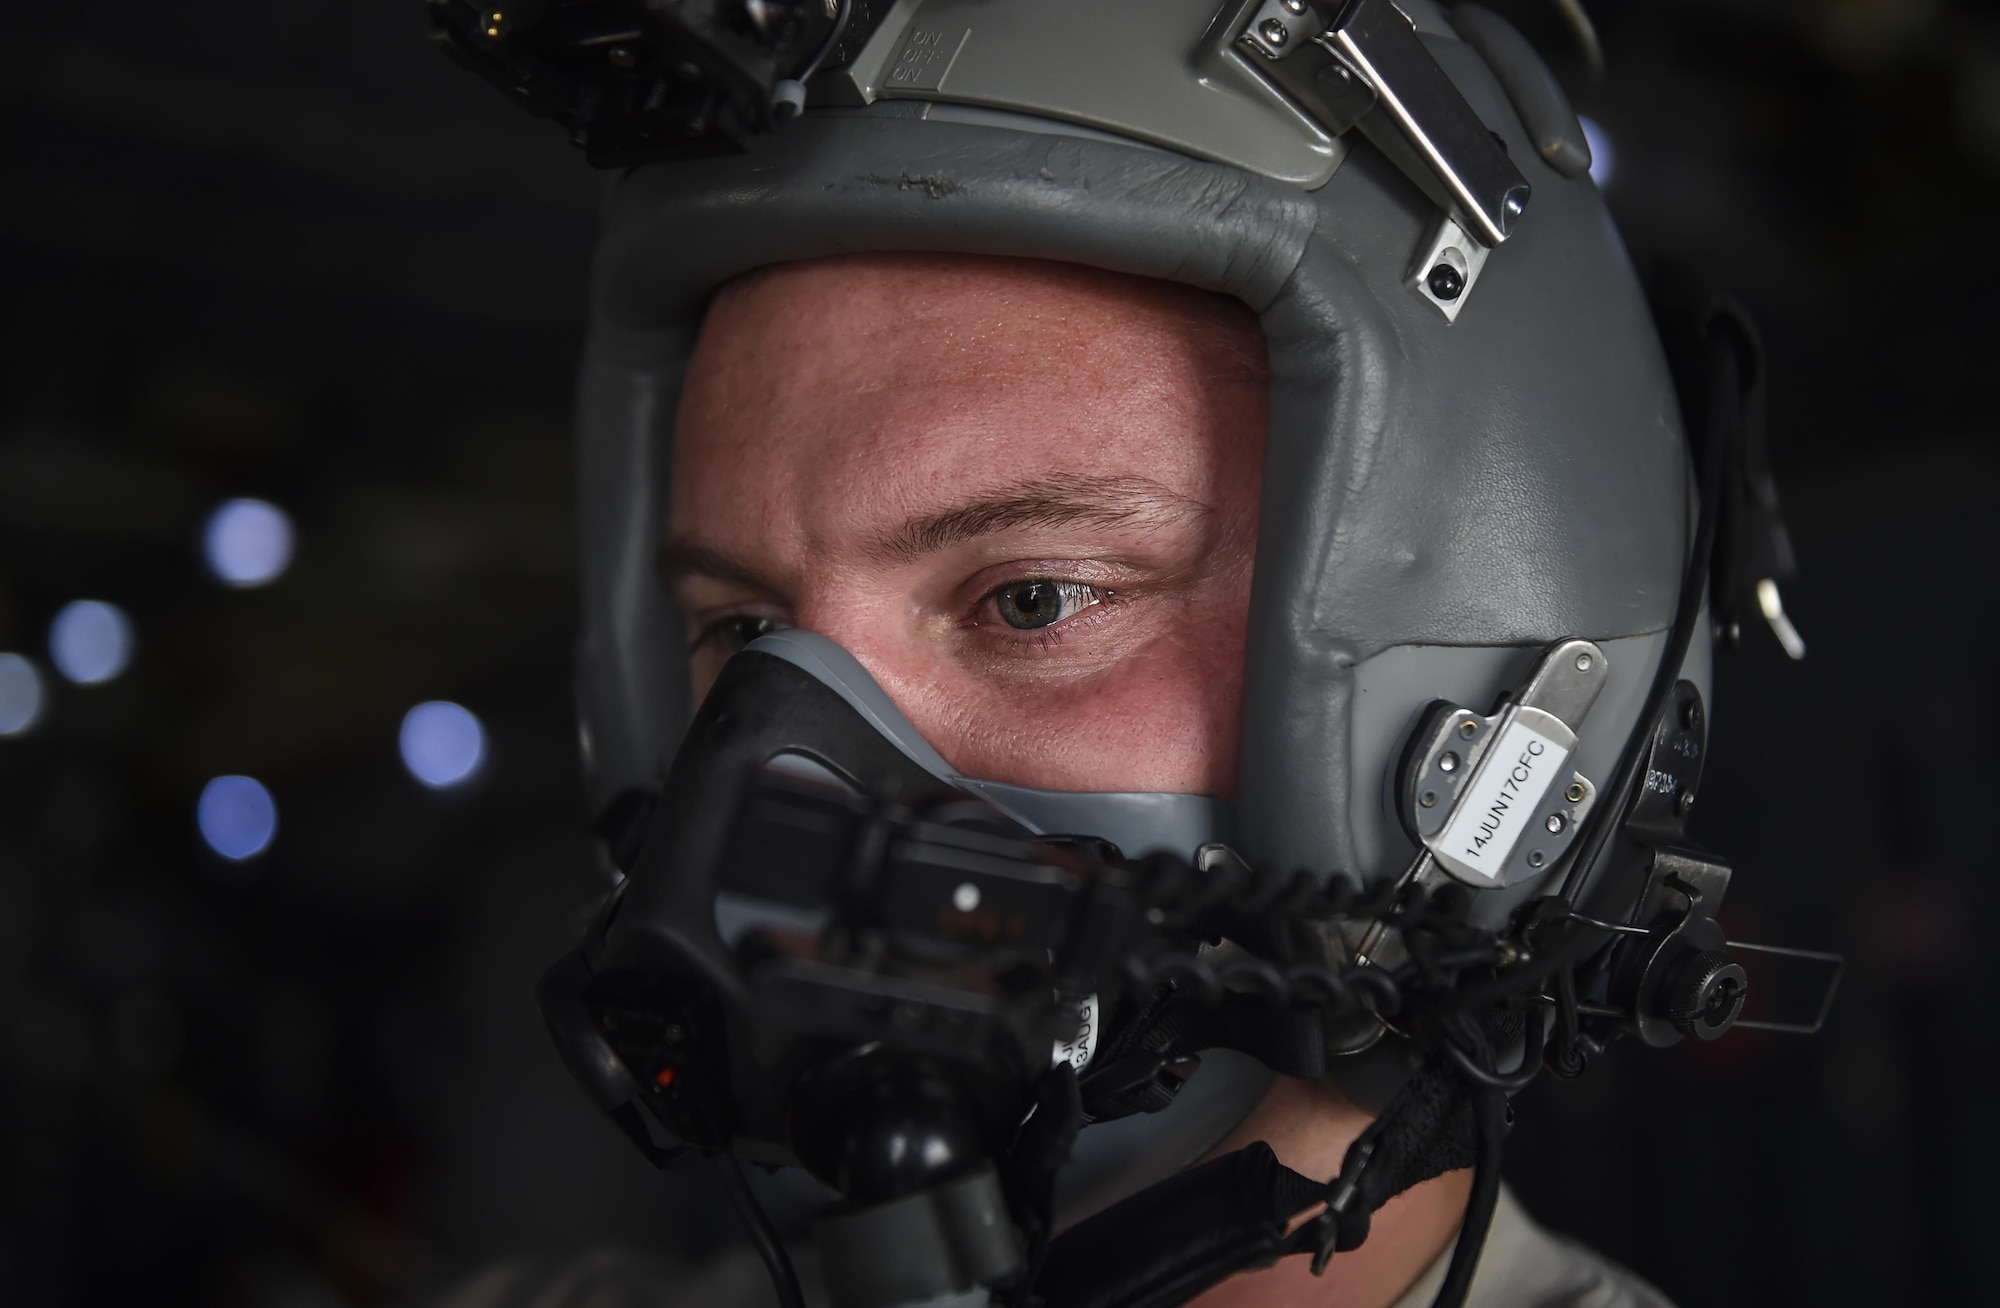 Tech. Sgt. Zach Kelhi, a loadmaster with the 15th Special Operations Squadron, checks the seal of an oxygen mask on an MC-130H Combat Talon II at Hurlburt Field, Fla., May 30, 2017. A seal is needed for aircrew members to receive oxygen during an emergency. (U.S. Air Force photo by Airman 1st Class Joseph Pick)